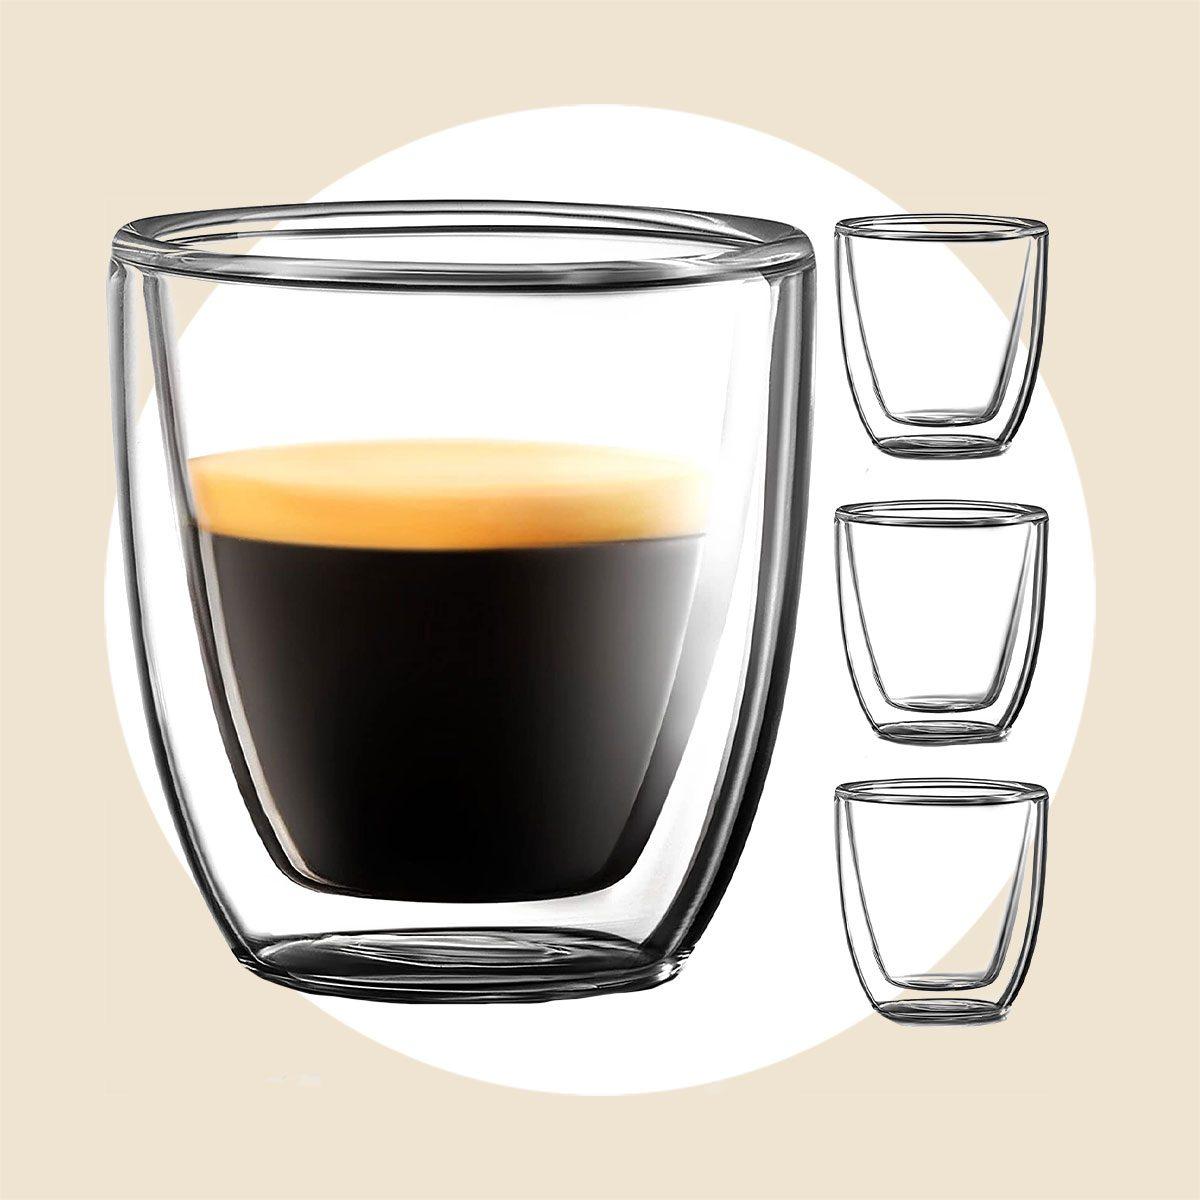 Enjoy your espresso with clean and clear Glass Espresso Cups